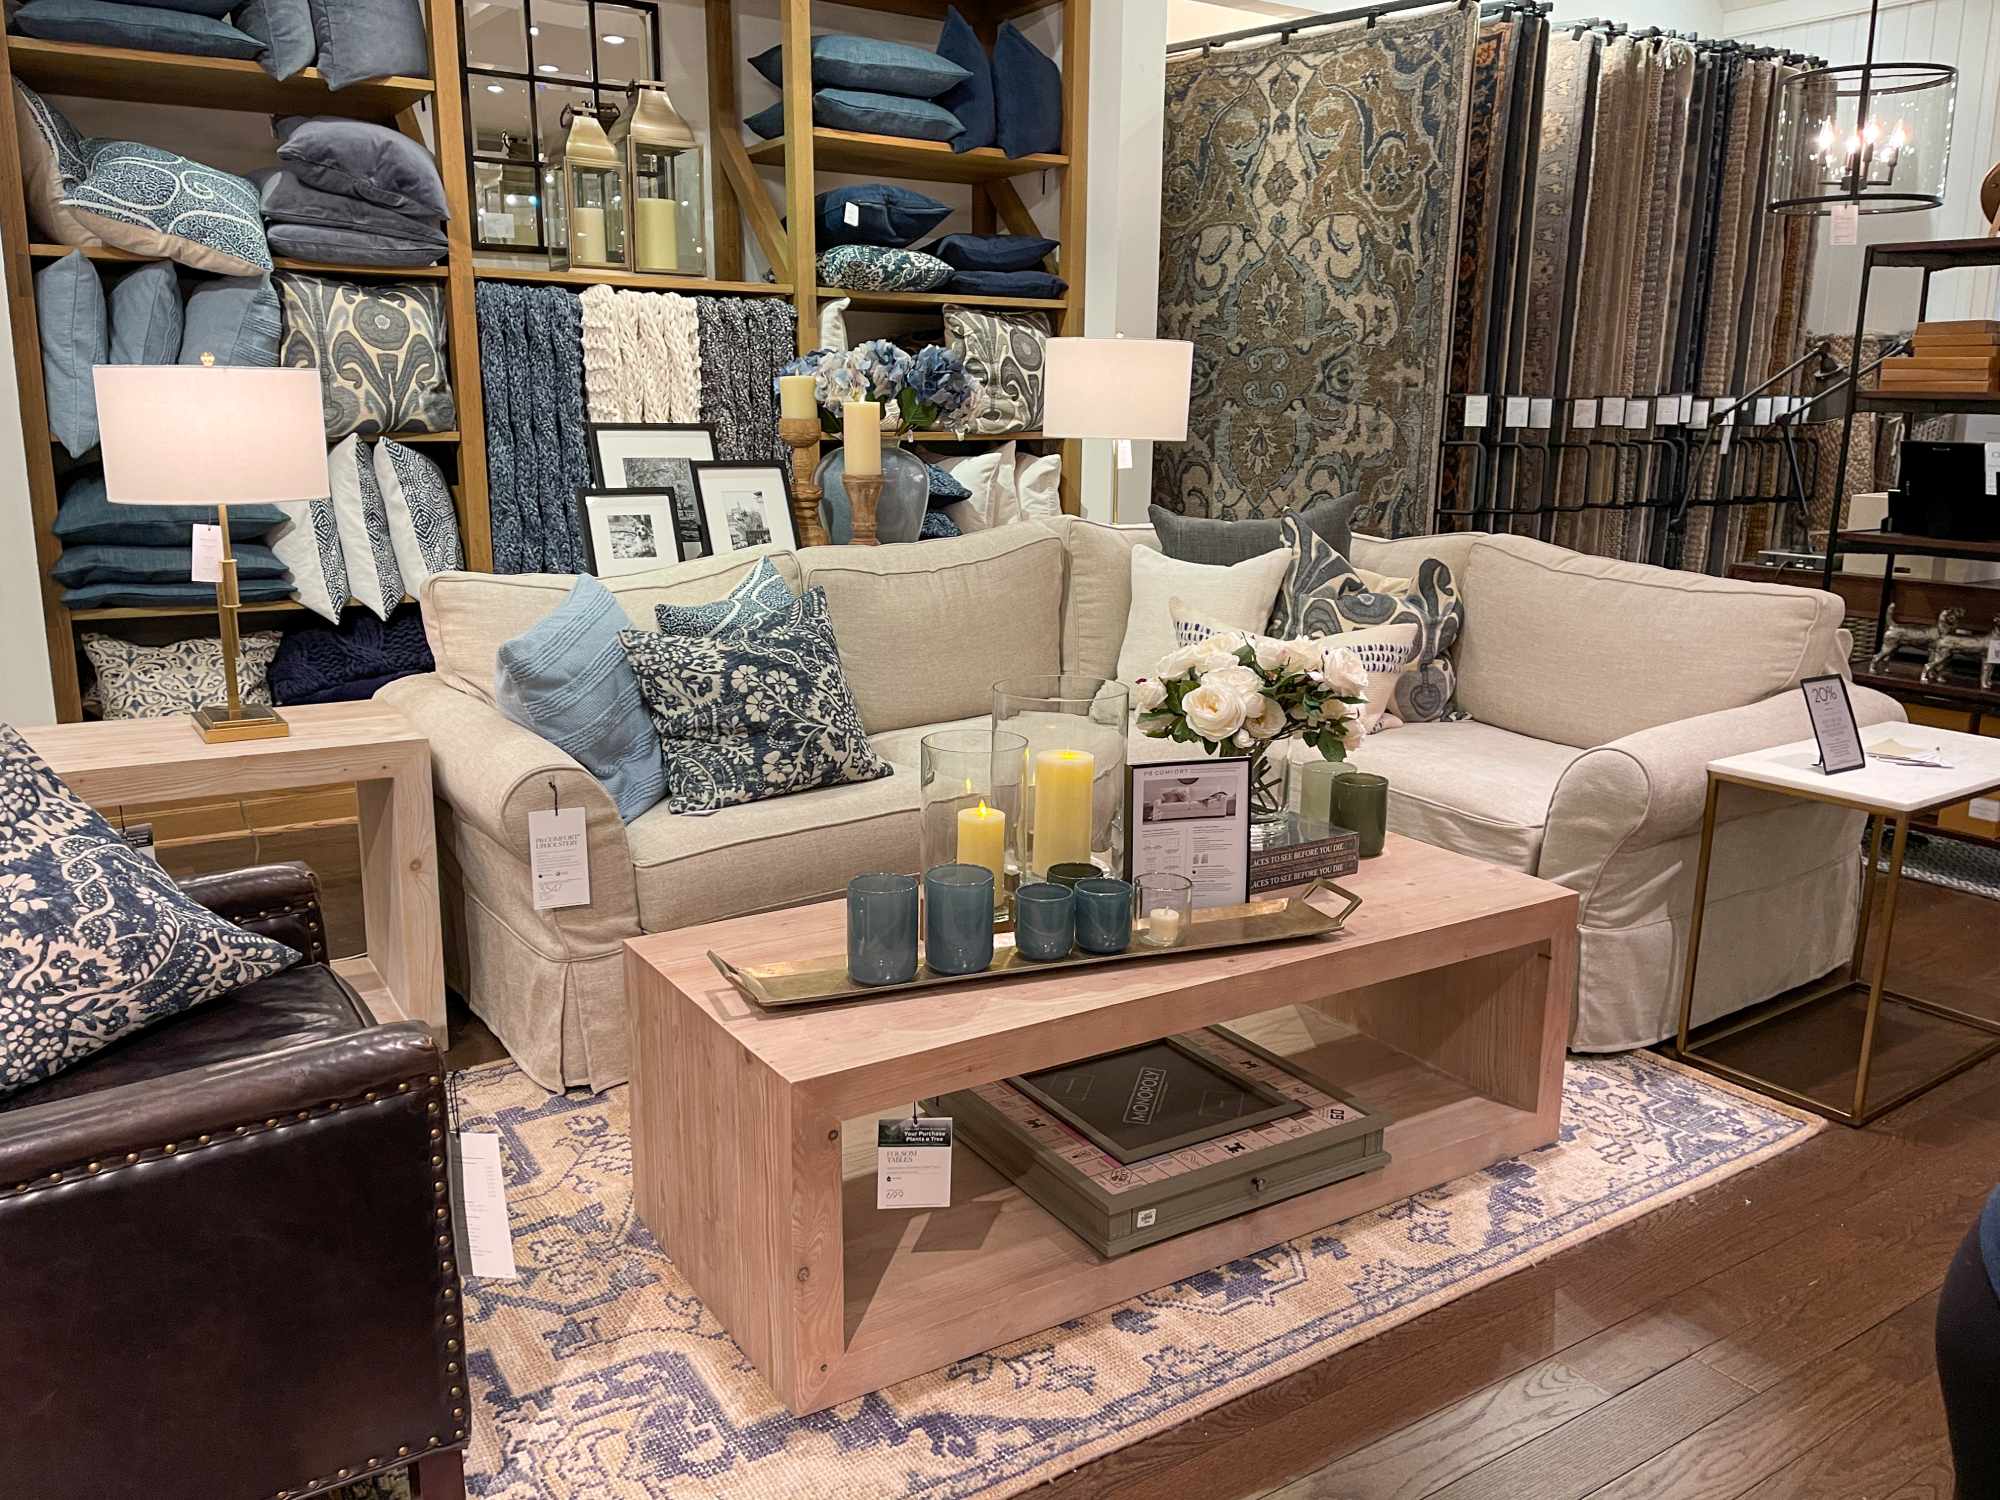 Inside a Pottery Barn store in Florida